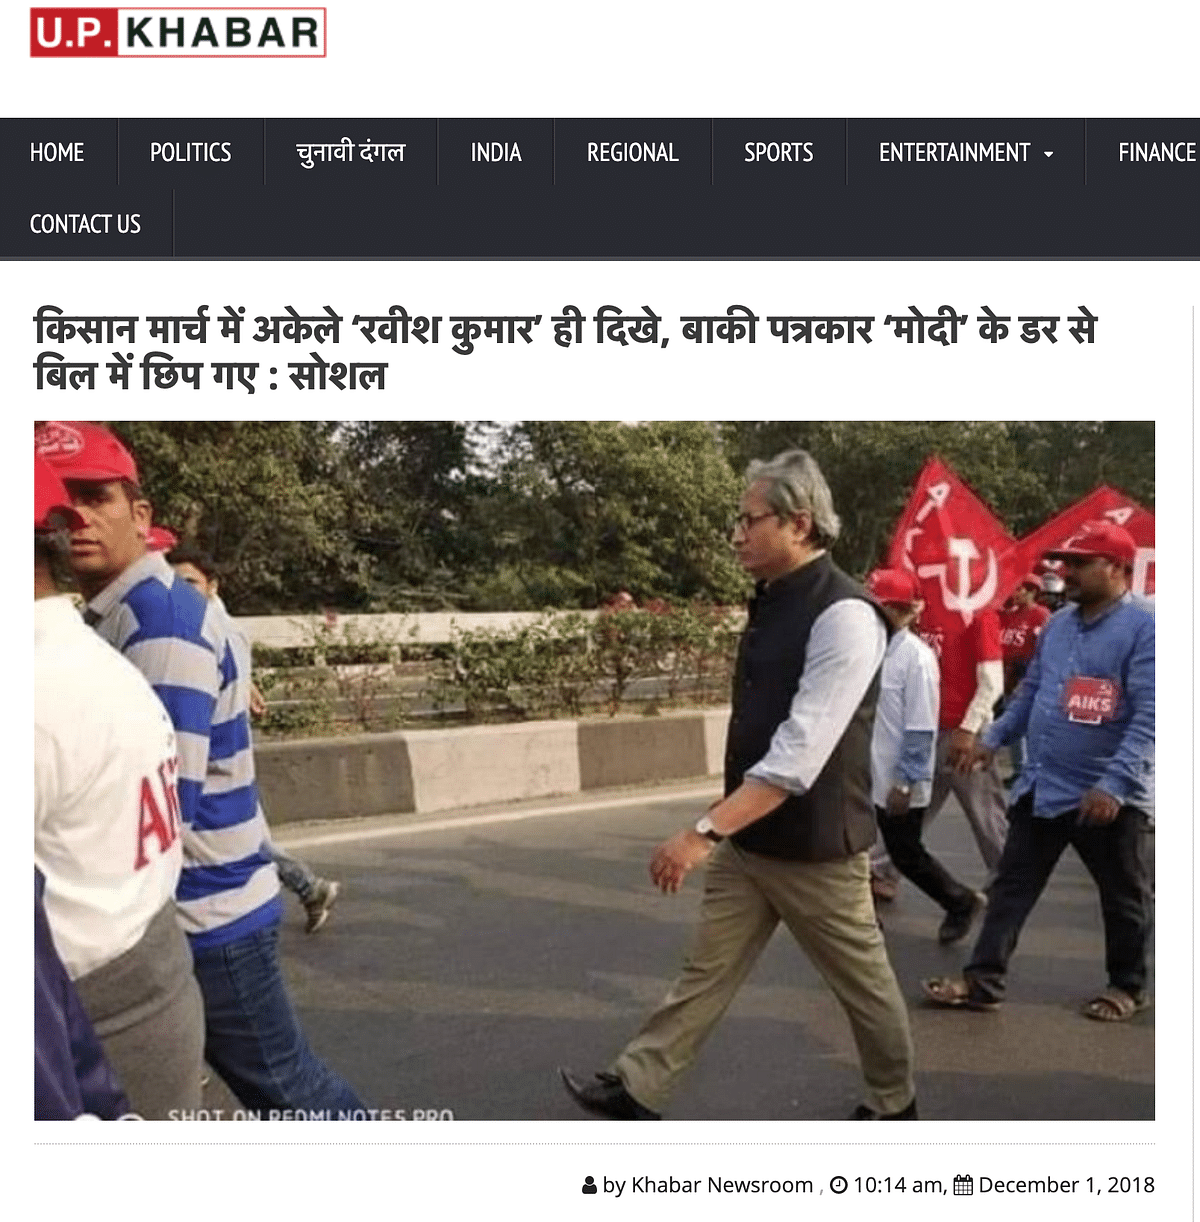 Image of Ravish Kumar From 2018 Kisan March Rally Shared as Recent